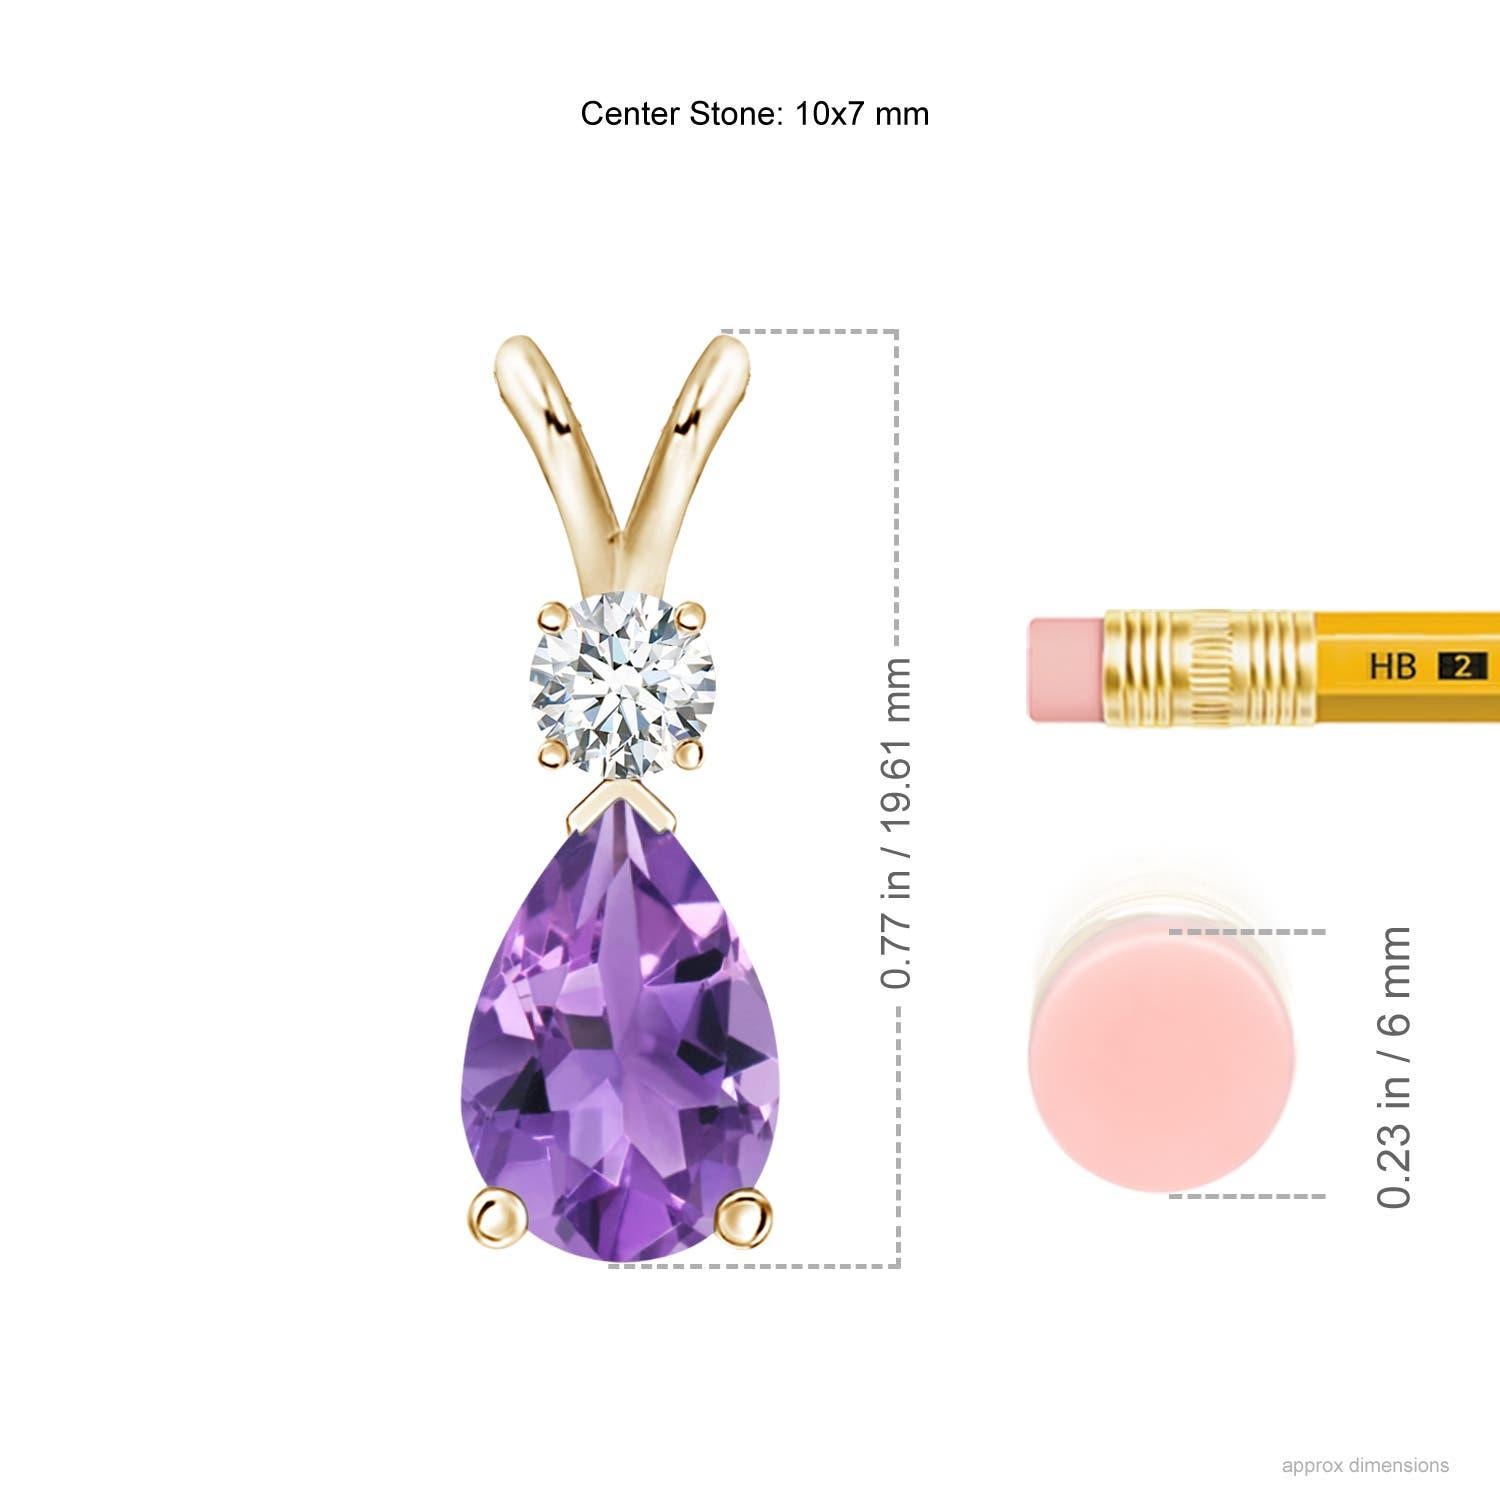 A pear-shaped deep purple amethyst is secured in a prong setting and embellished with a diamond accent on the top. Simple yet stunning, this teardrop amethyst pendant with V bale is sculpted in 14k yellow gold.